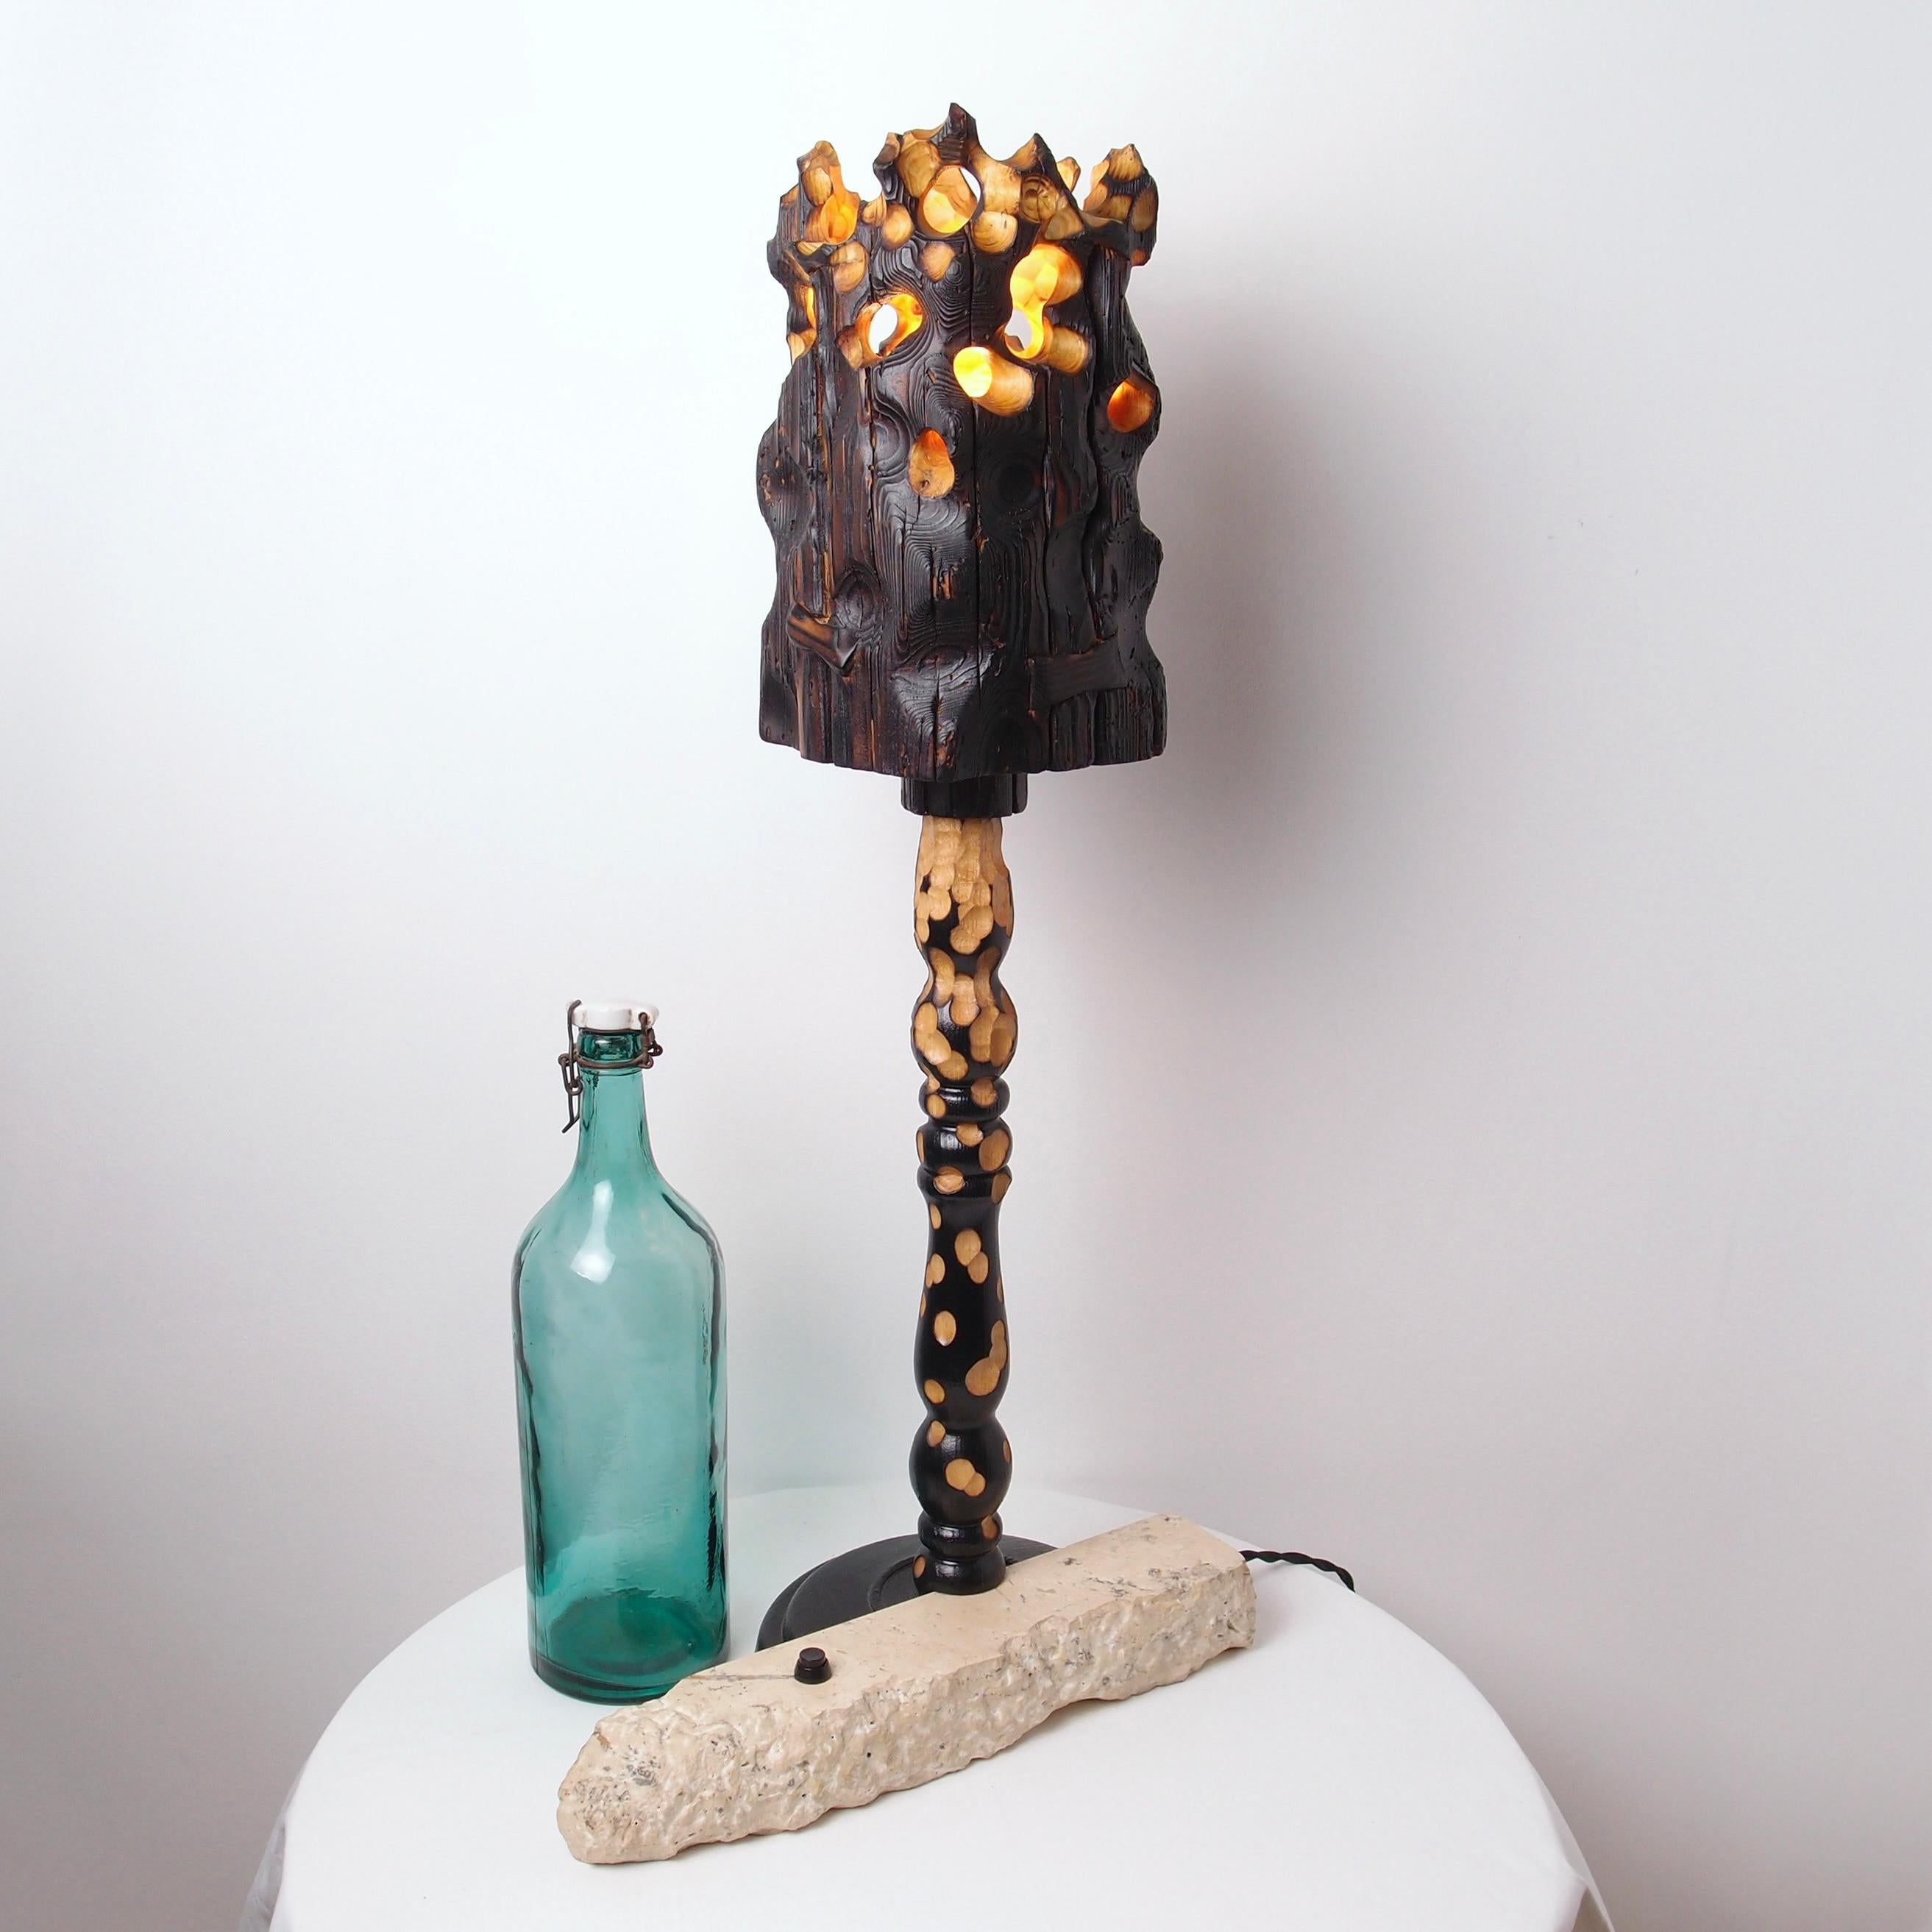 Torch, Sculptured Lighting, Table Lamp from Reclaimed Burned Wood and Stone For Sale 1